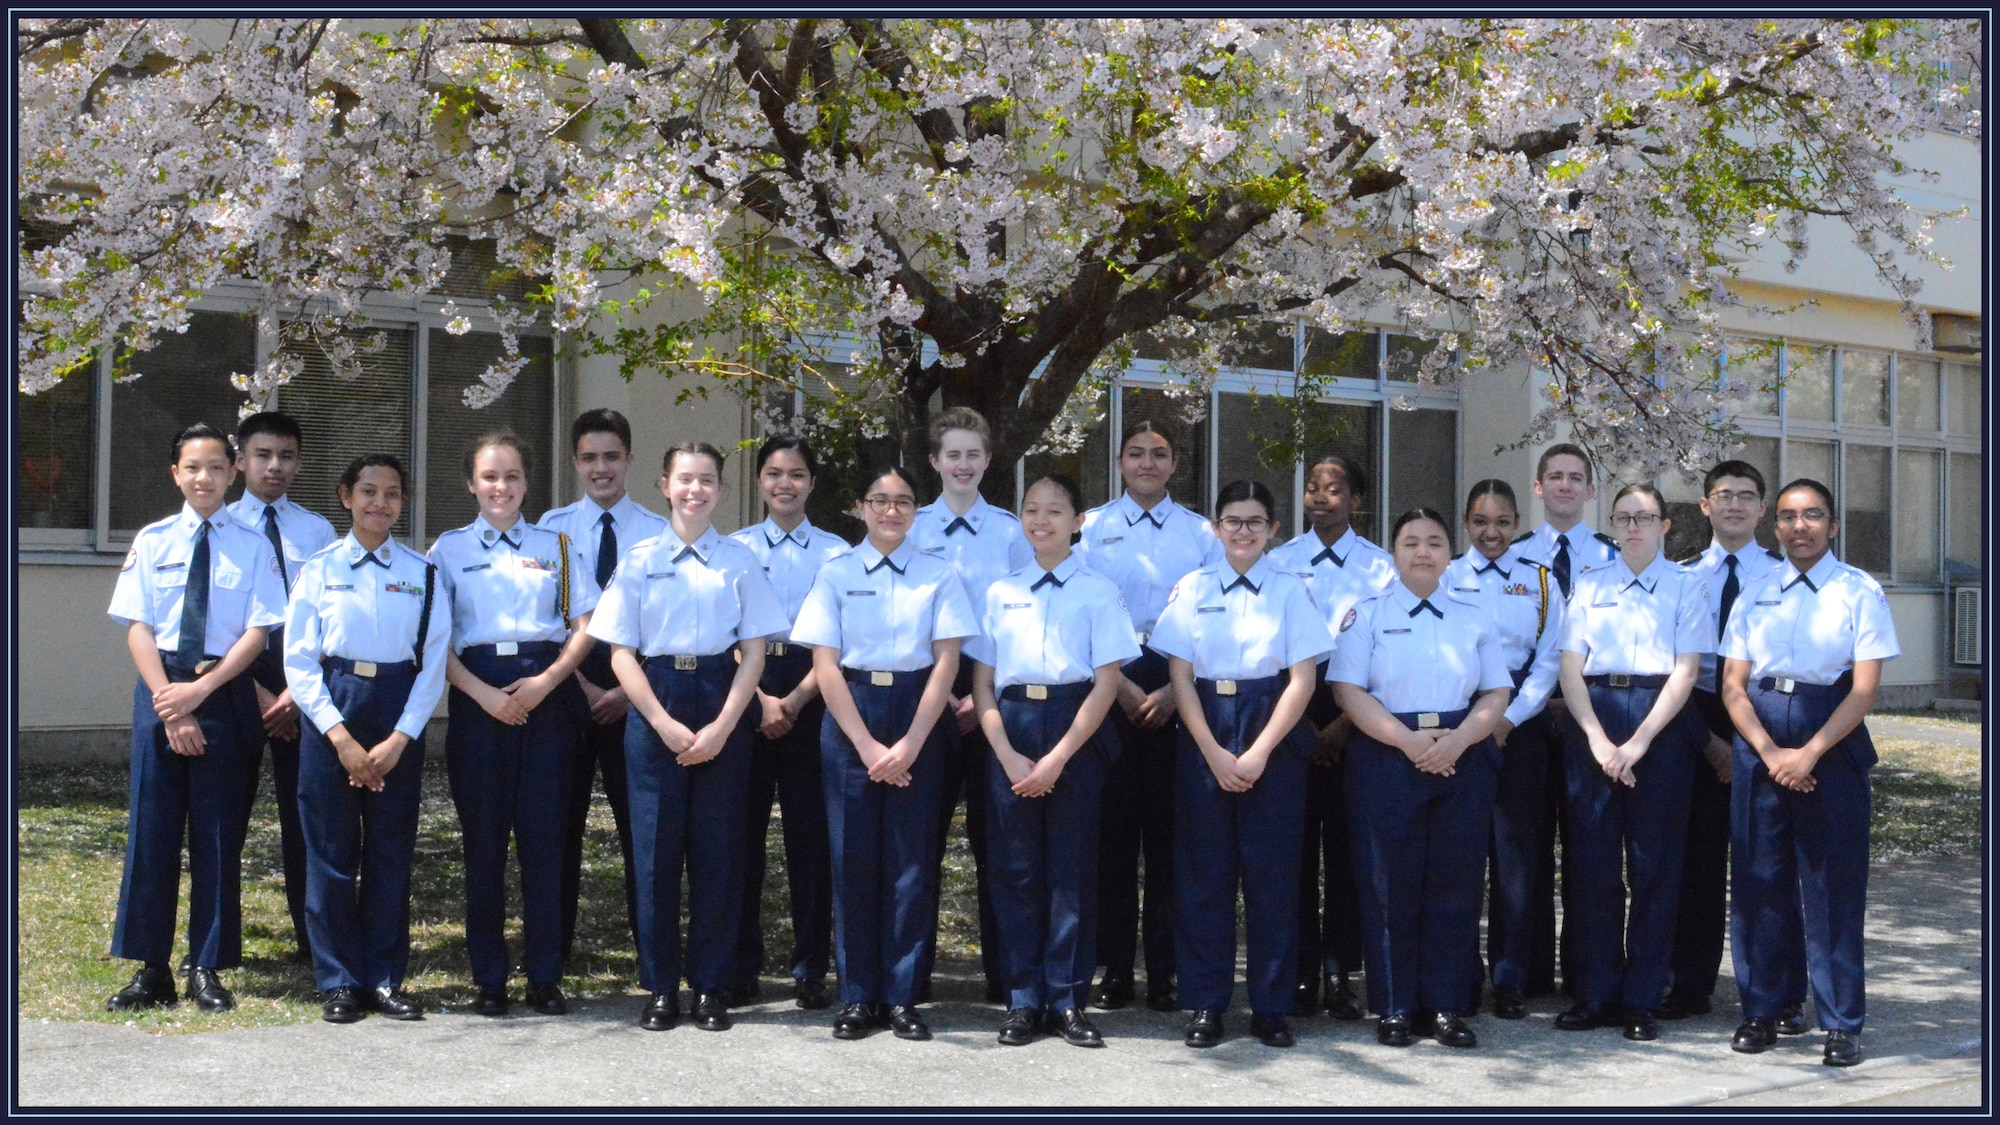 Among many-many wonderful things to include its beautiful Cherry Blossoms, Japan can now be known for the driven and intelligent cadets of Misawa’s JA-931.  The 19 pictured here were recognized for academic excellence in the 3rd quarter by Robert D. Edgren High School, and four of them are 8th graders!